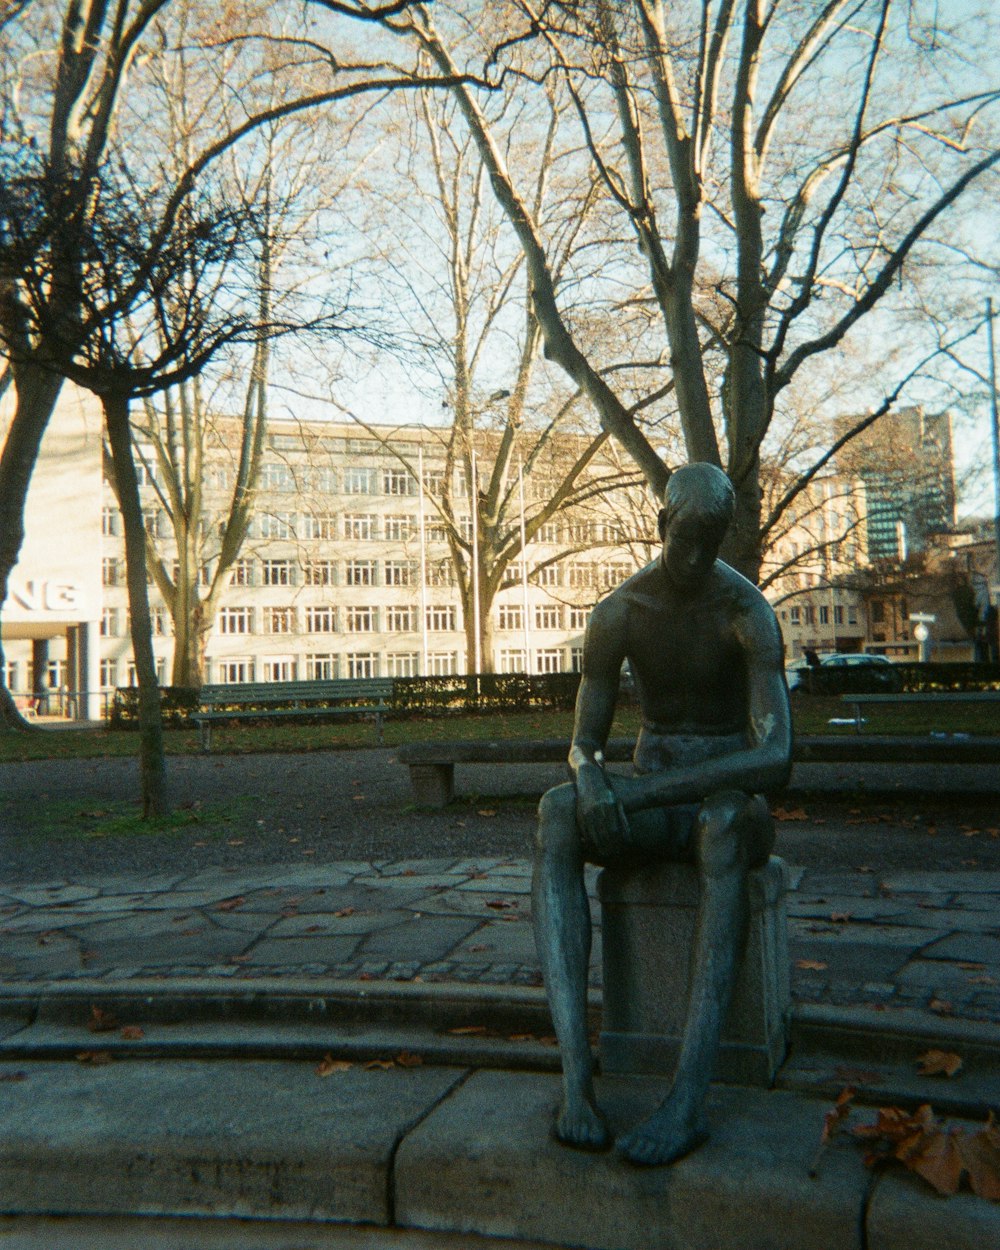 a statue of a man sitting on a park bench